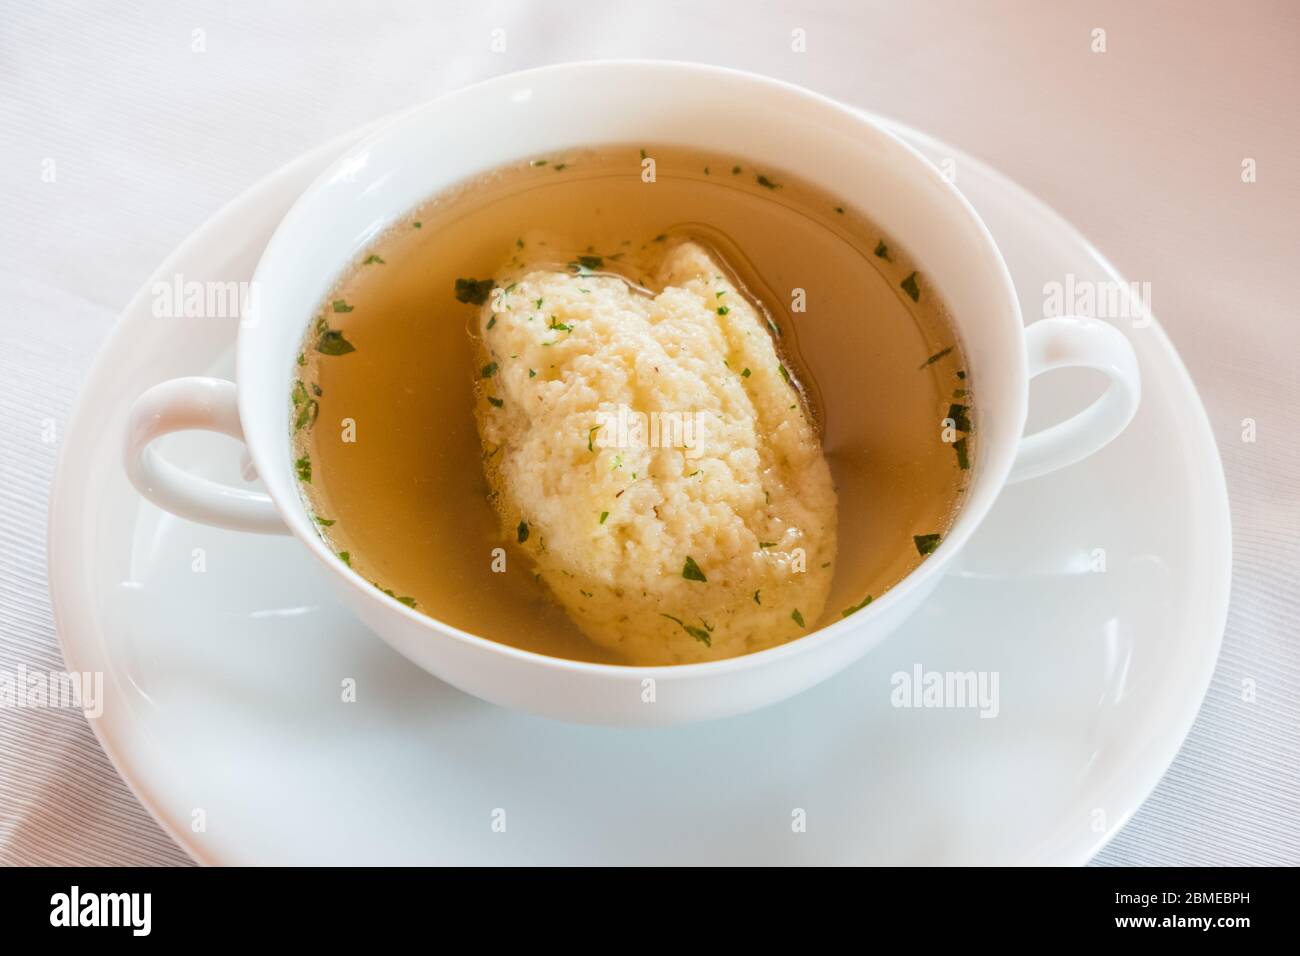 Semolina Dumpling Soup, Beef Broth with Parsley in a White Bouillon Cup, a Specialty of Austrian and Viennese Cuisine Stock Photo